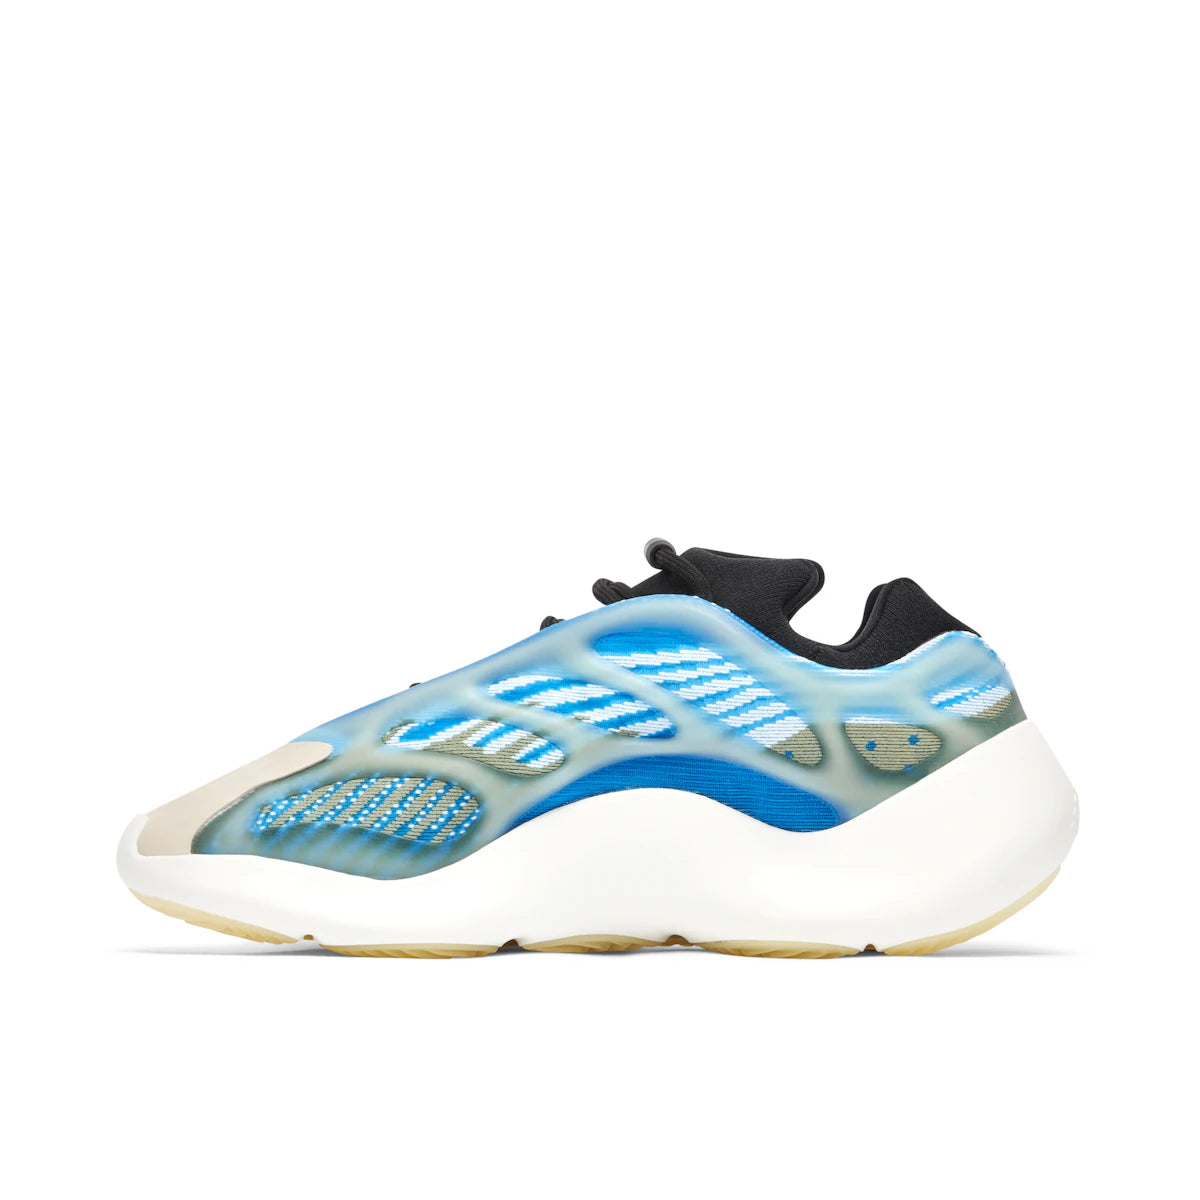 Adidas Yeezy 700 V3 Arzareth by Yeezy from £255.00